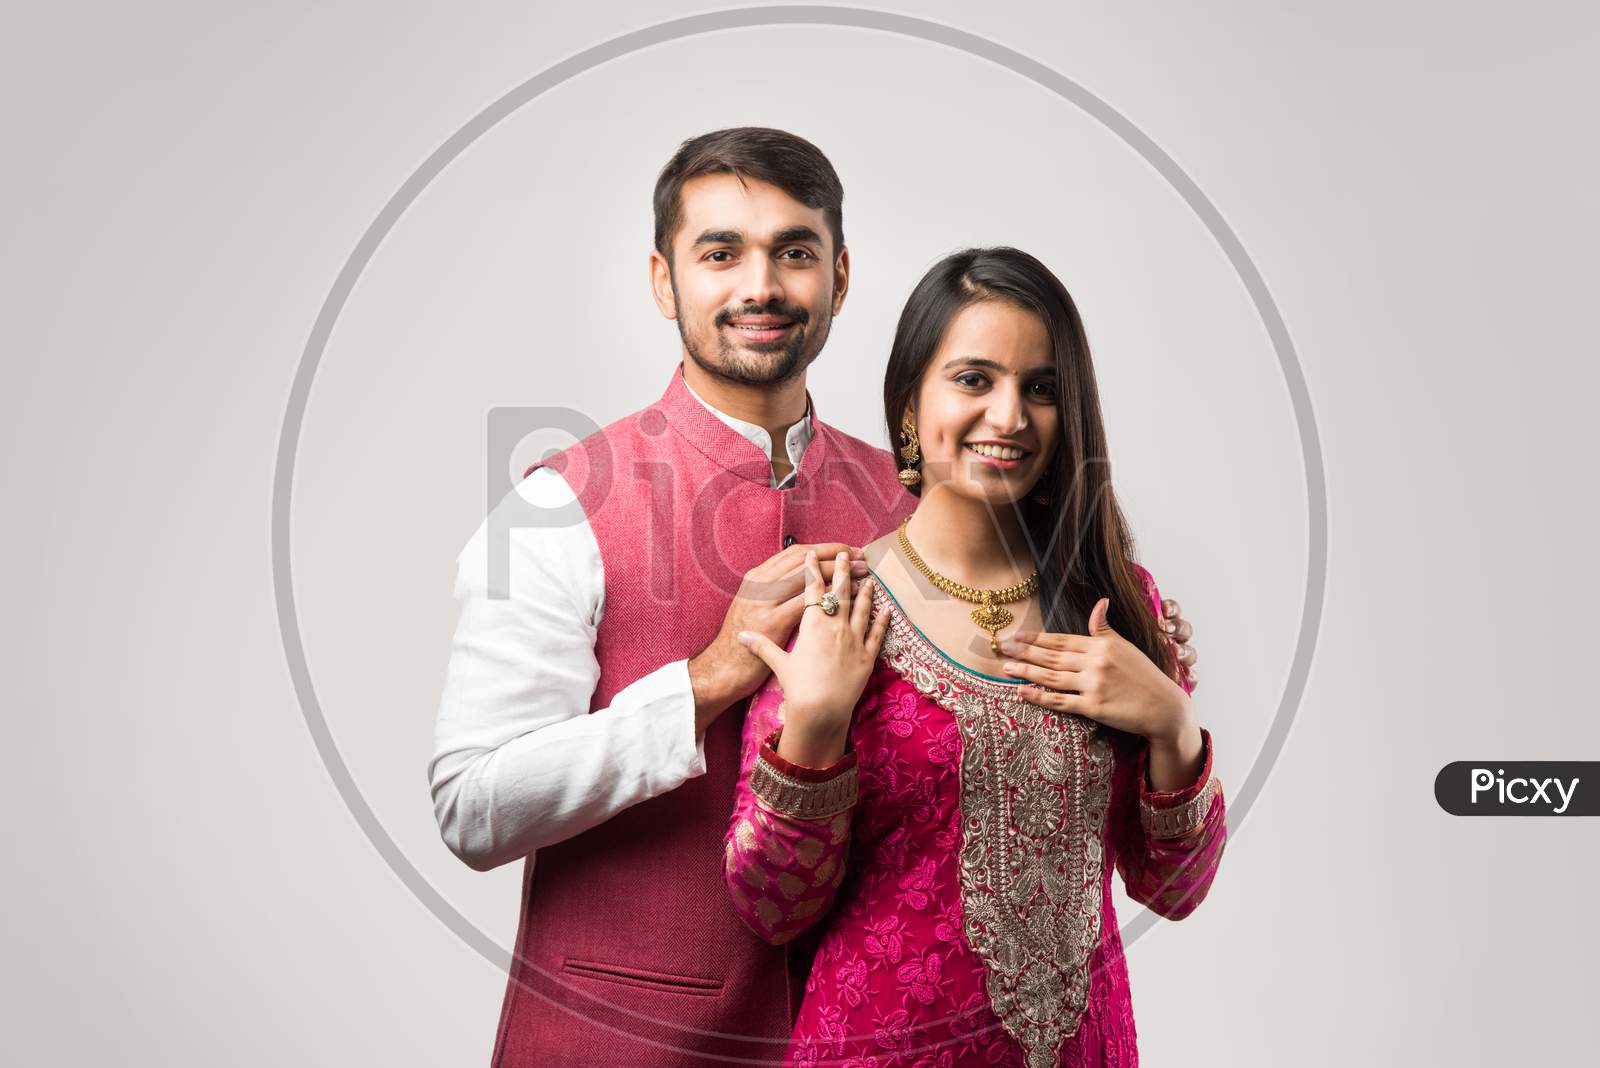 Handsome Young Indian Man Presenting Expensive Gold Necklace To Pretty Young Girl Friend Or Wife